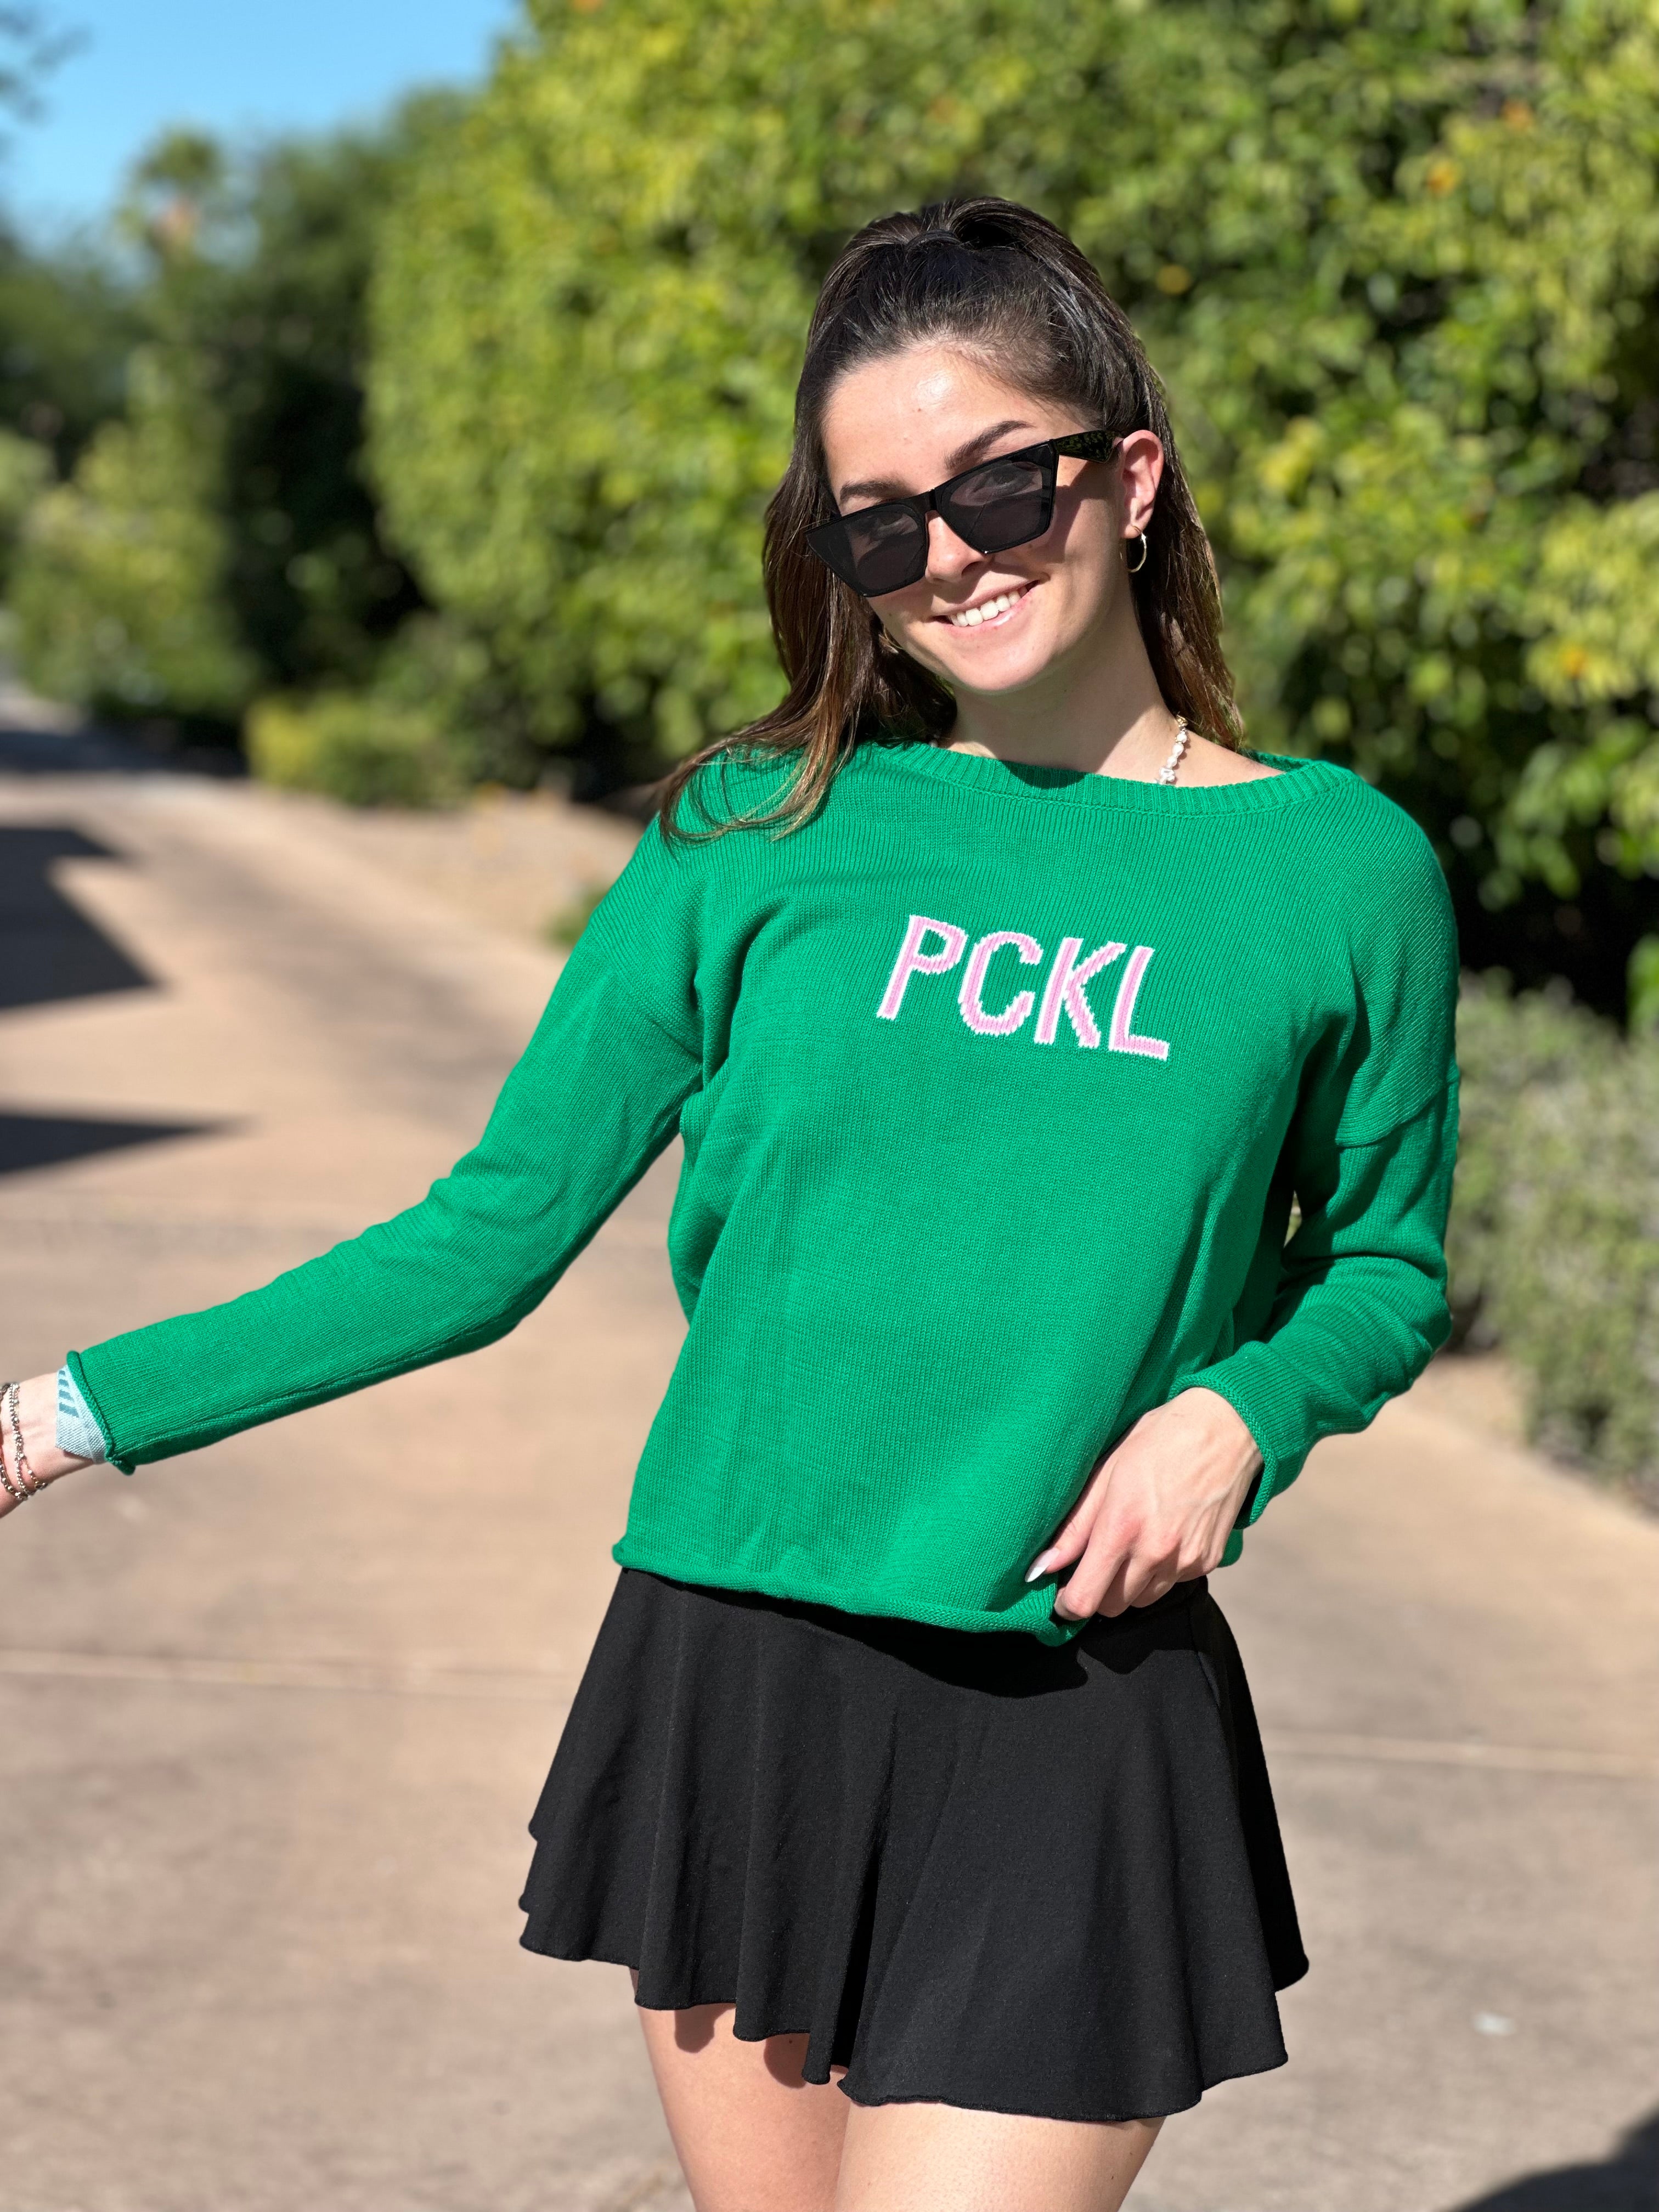 The Pickle Ball sweater